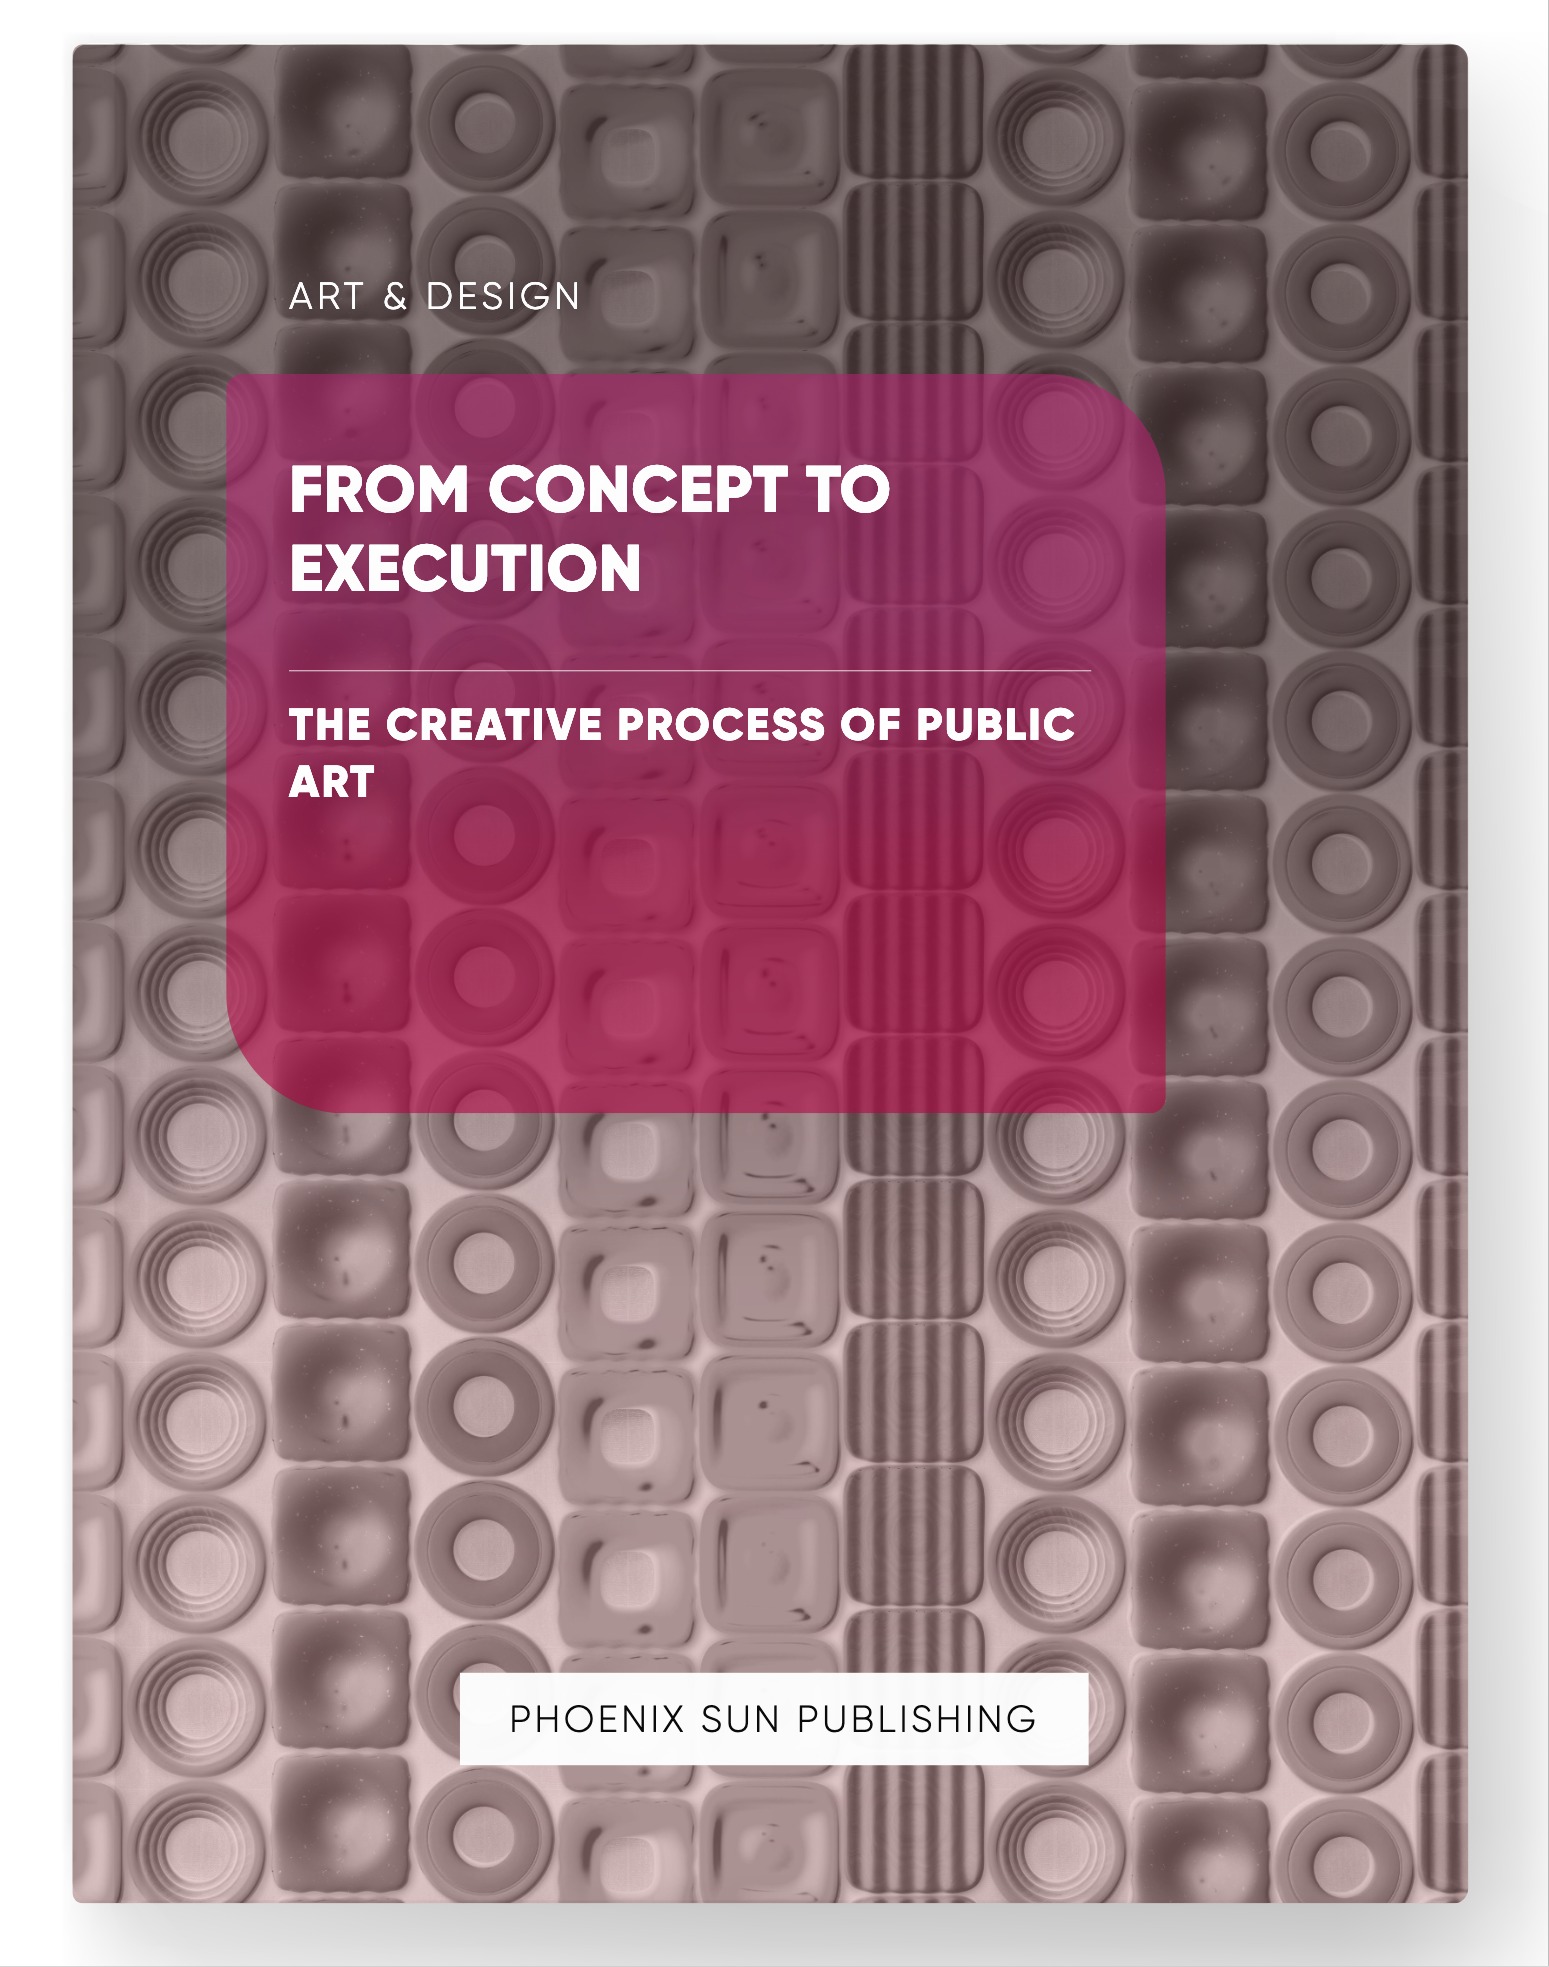 From Concept to Execution – The Creative Process of Public Art